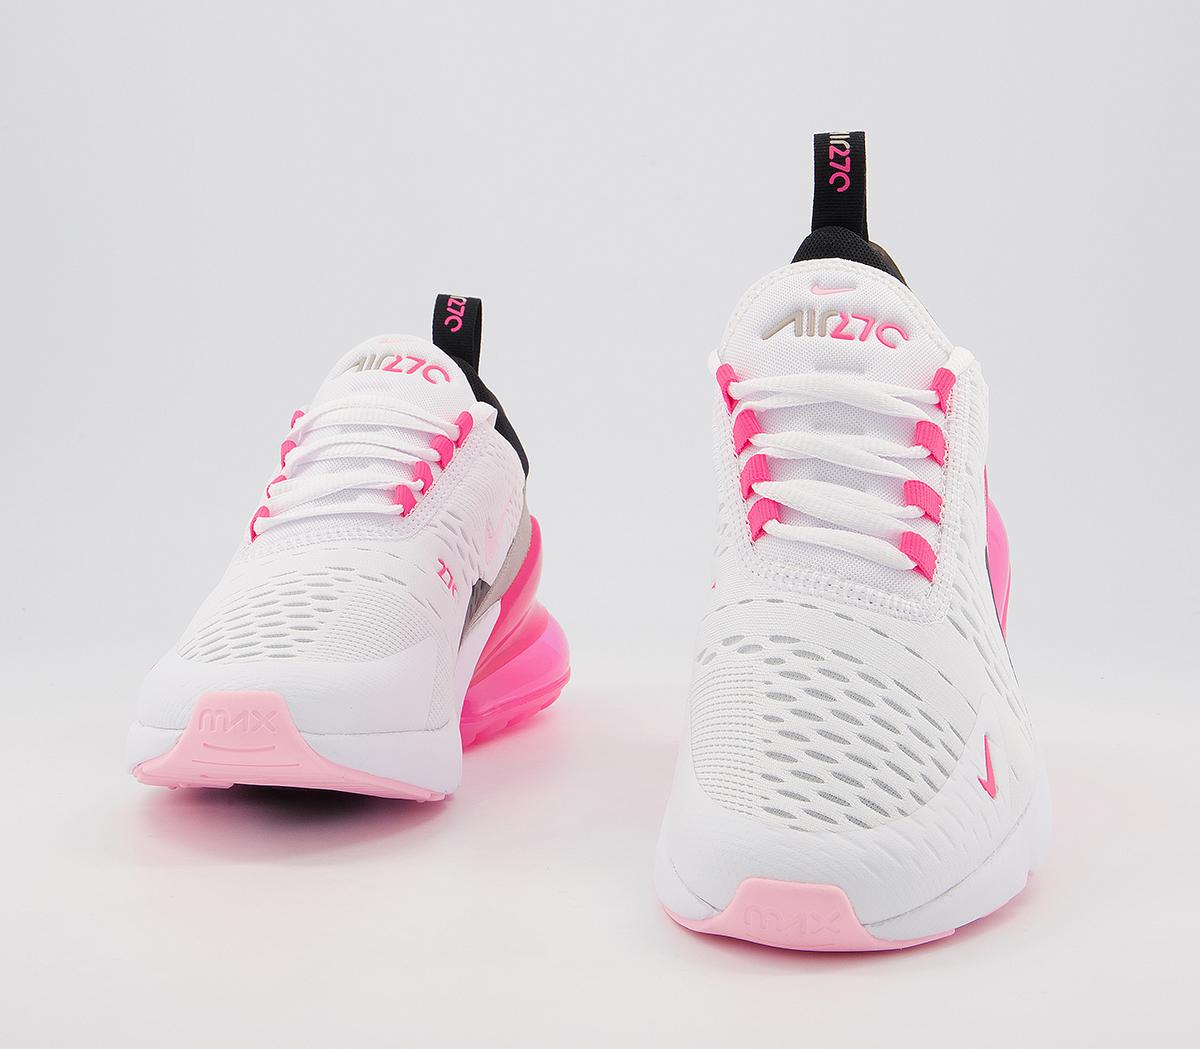 Nike Air Max 270 Trainers White Artic Punch Hyper Pink Black - Hers ...